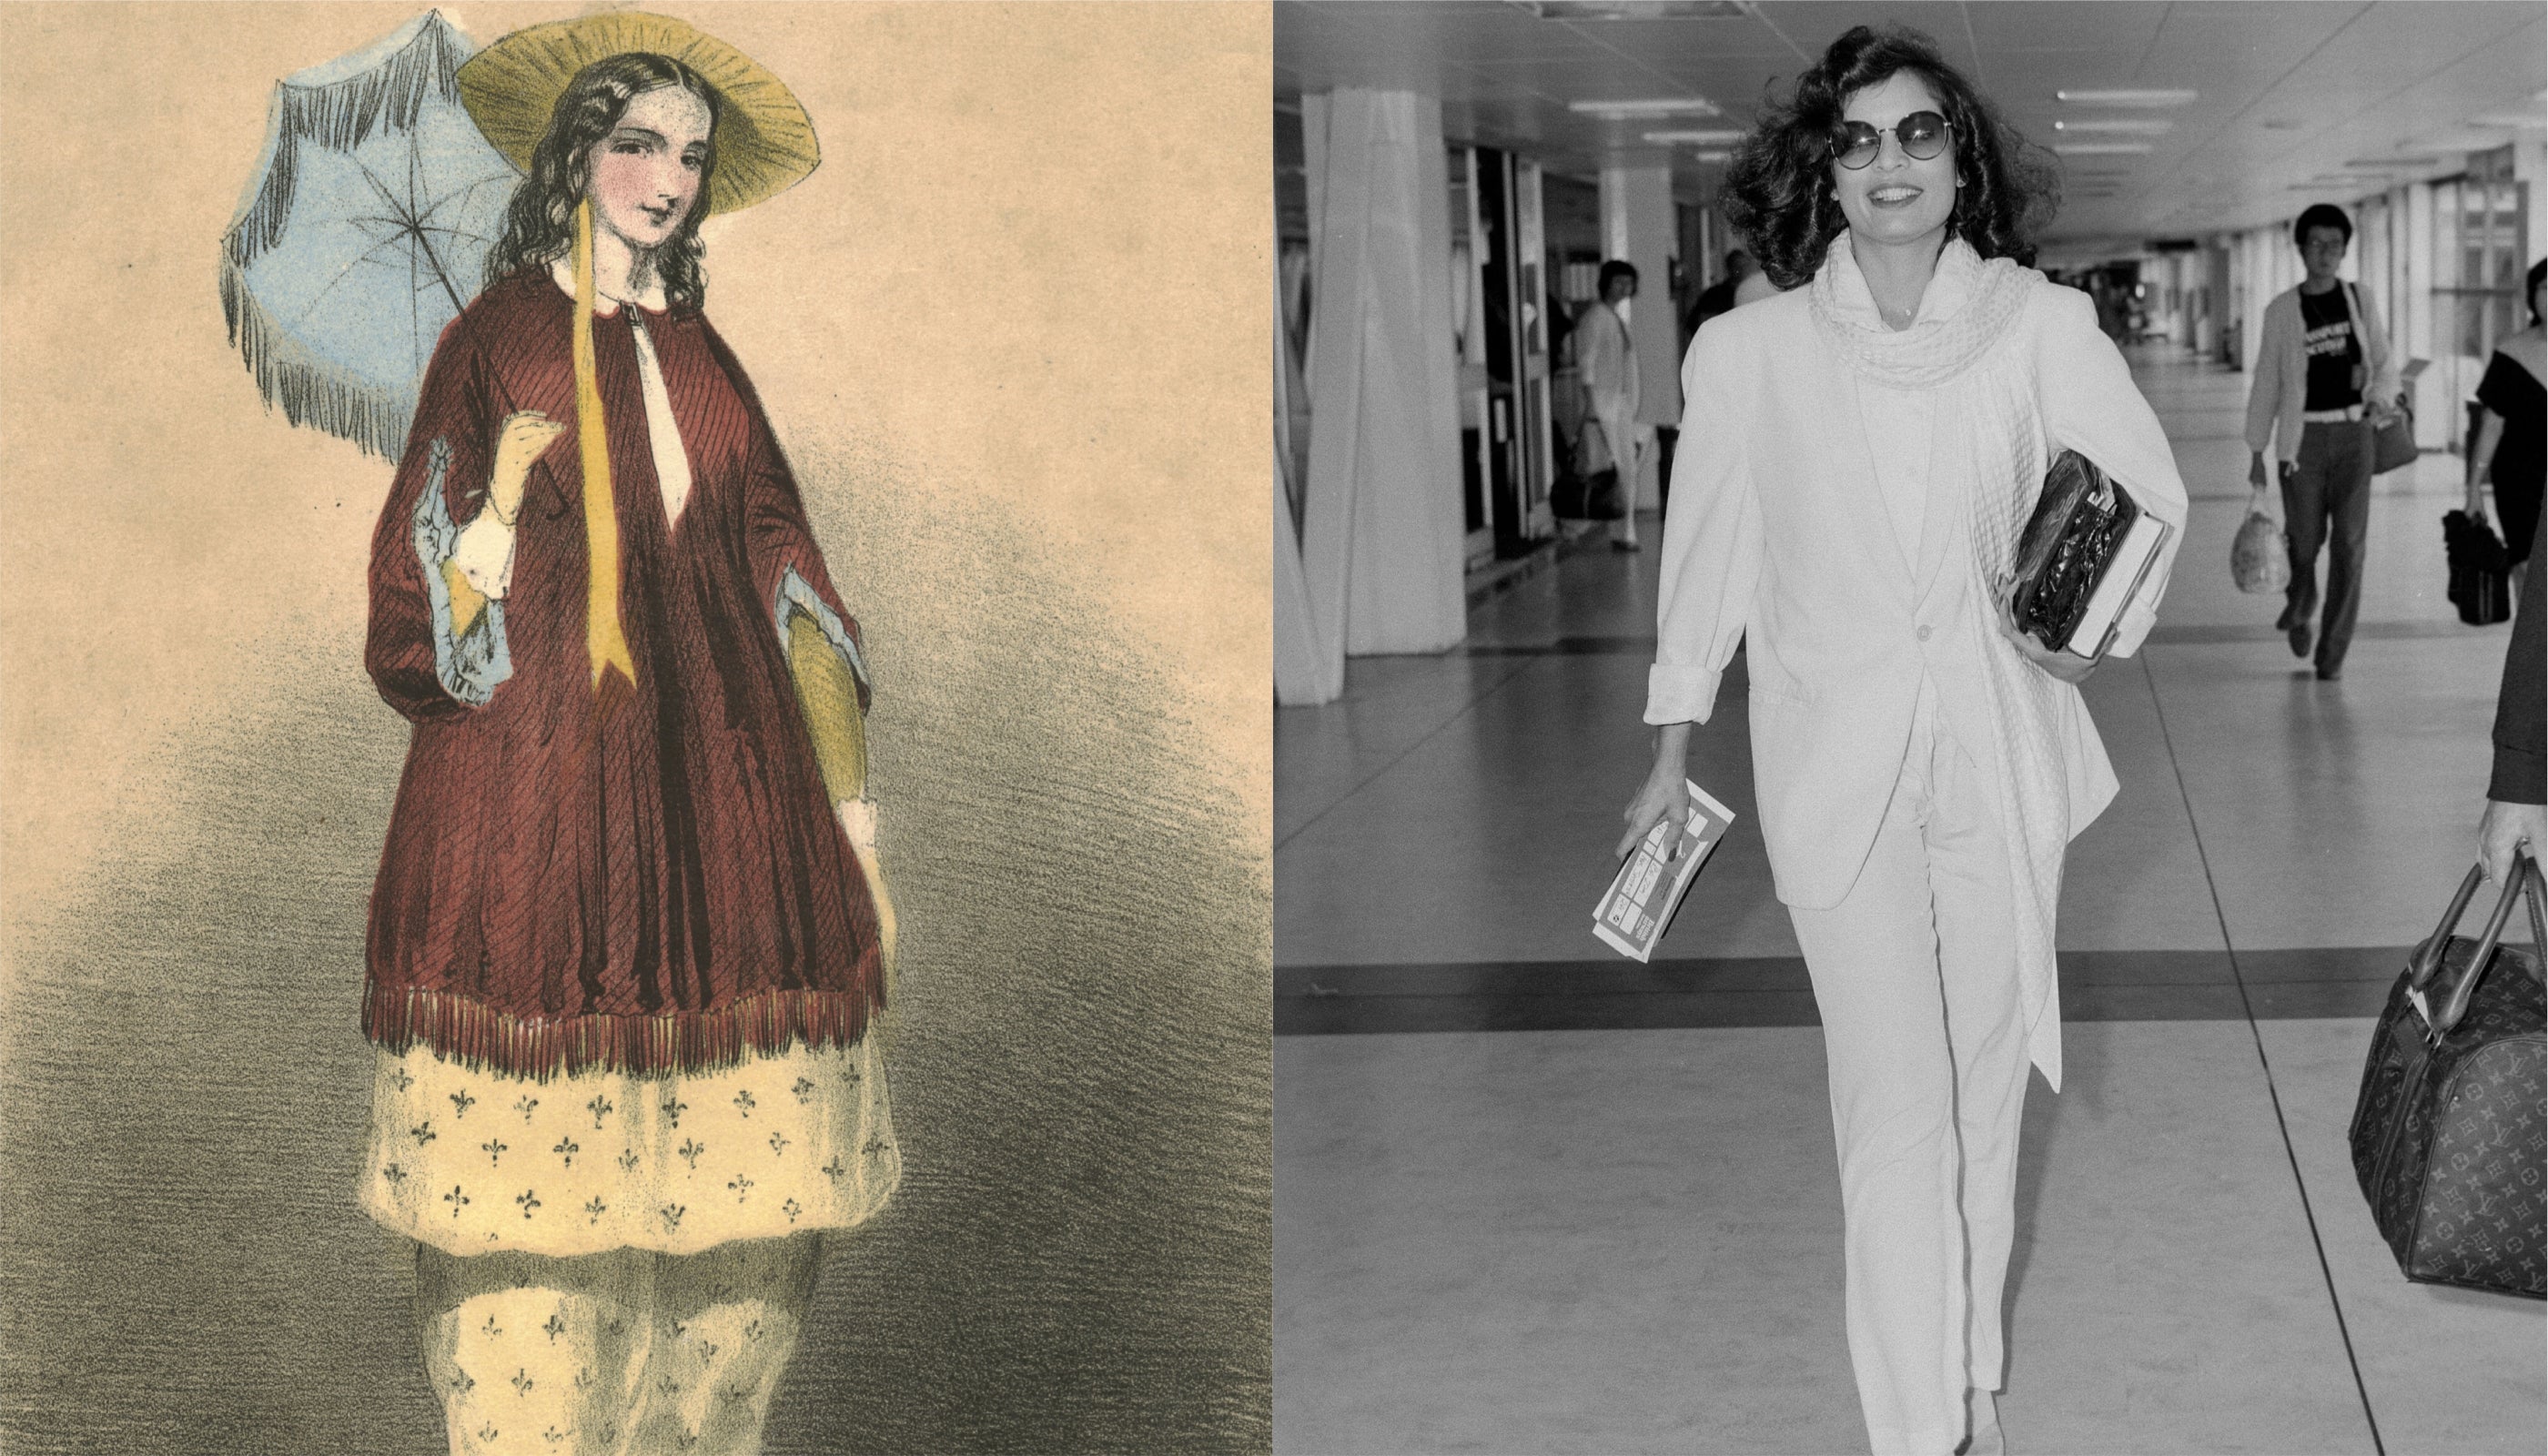 A brief history of women wearing trousers